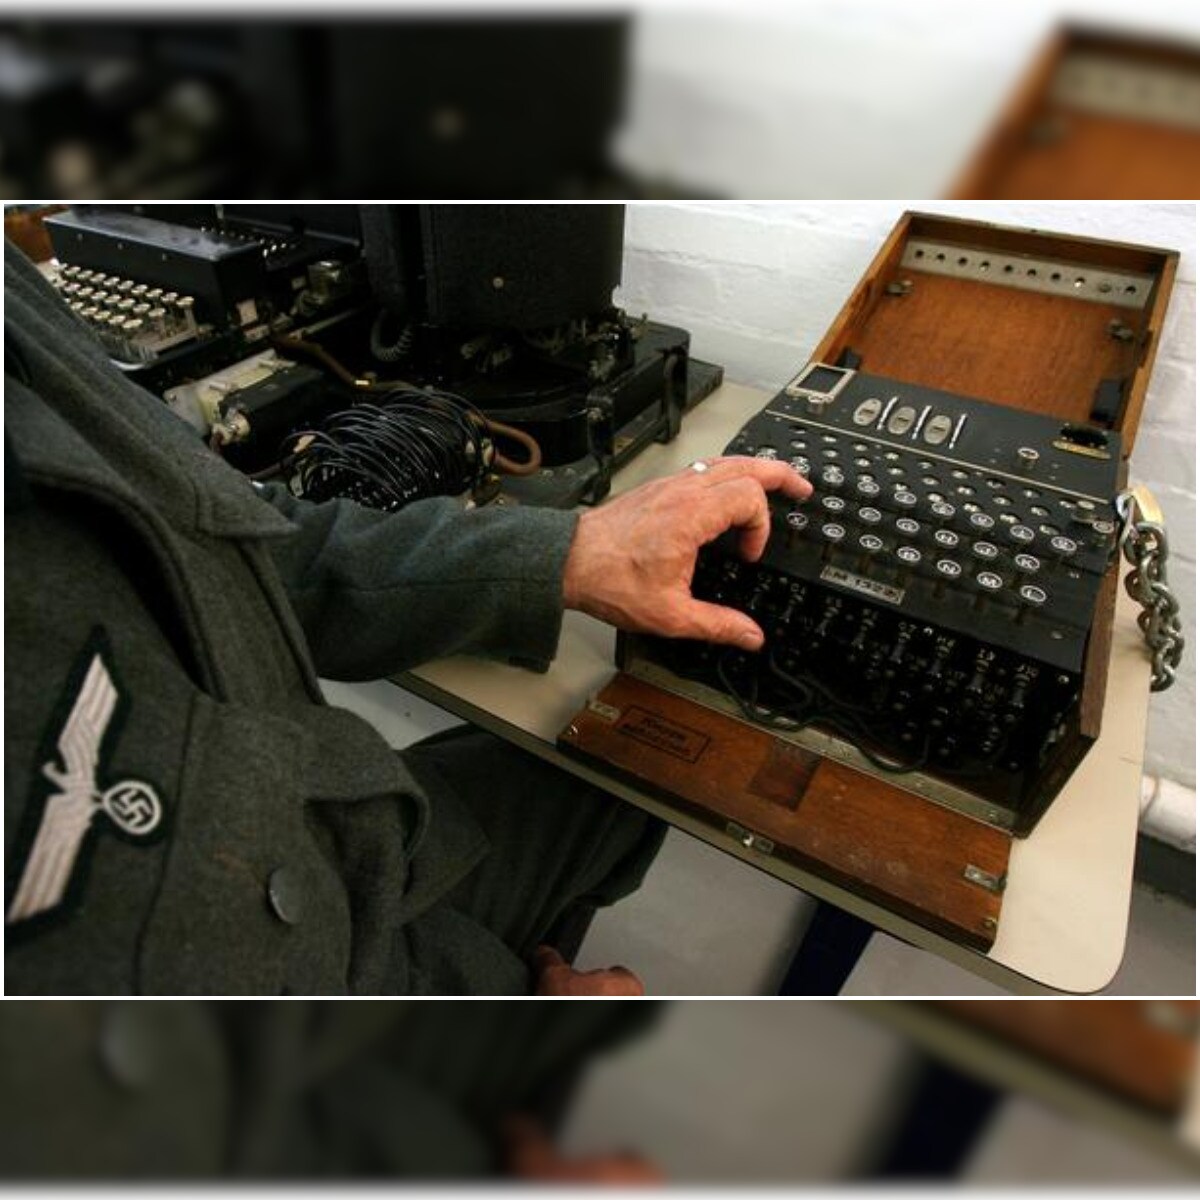 German Divers Discover Nazi Ww2 Enigma Machine While Searching For Fishing Nets In Baltic Sea